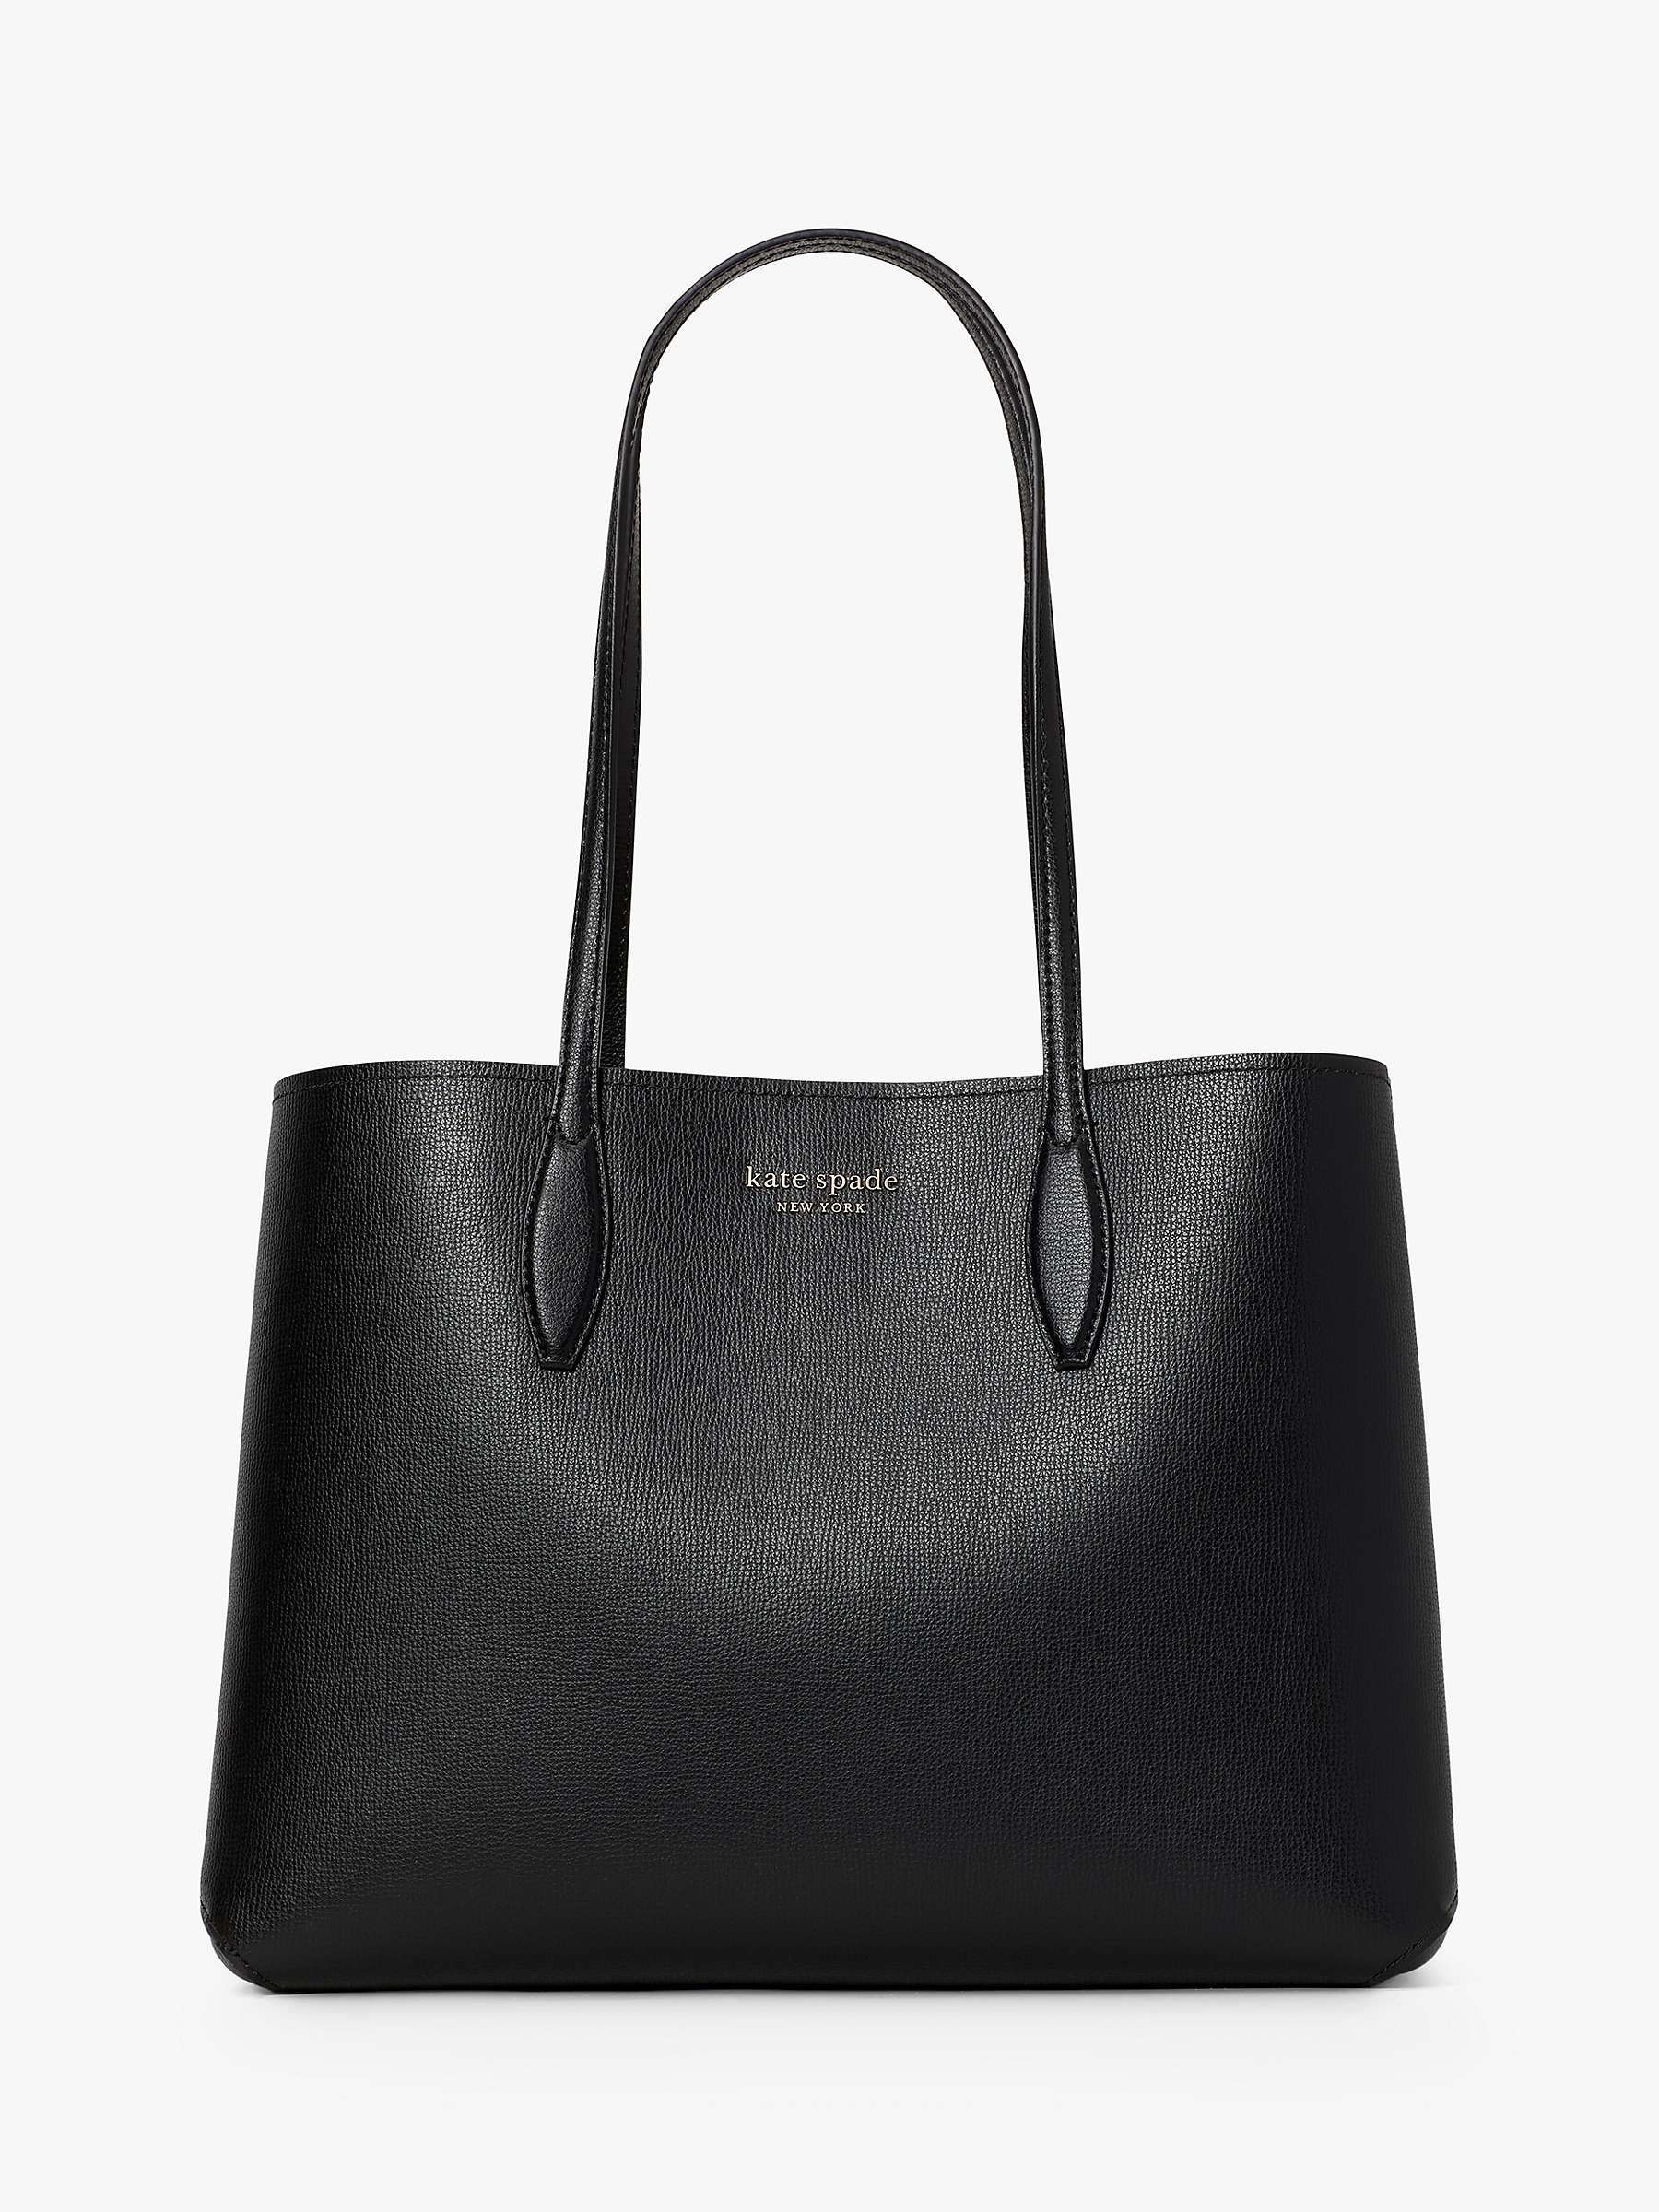 kate spade new york All Day Leather Large Tote Bag, Black at John Lewis ...